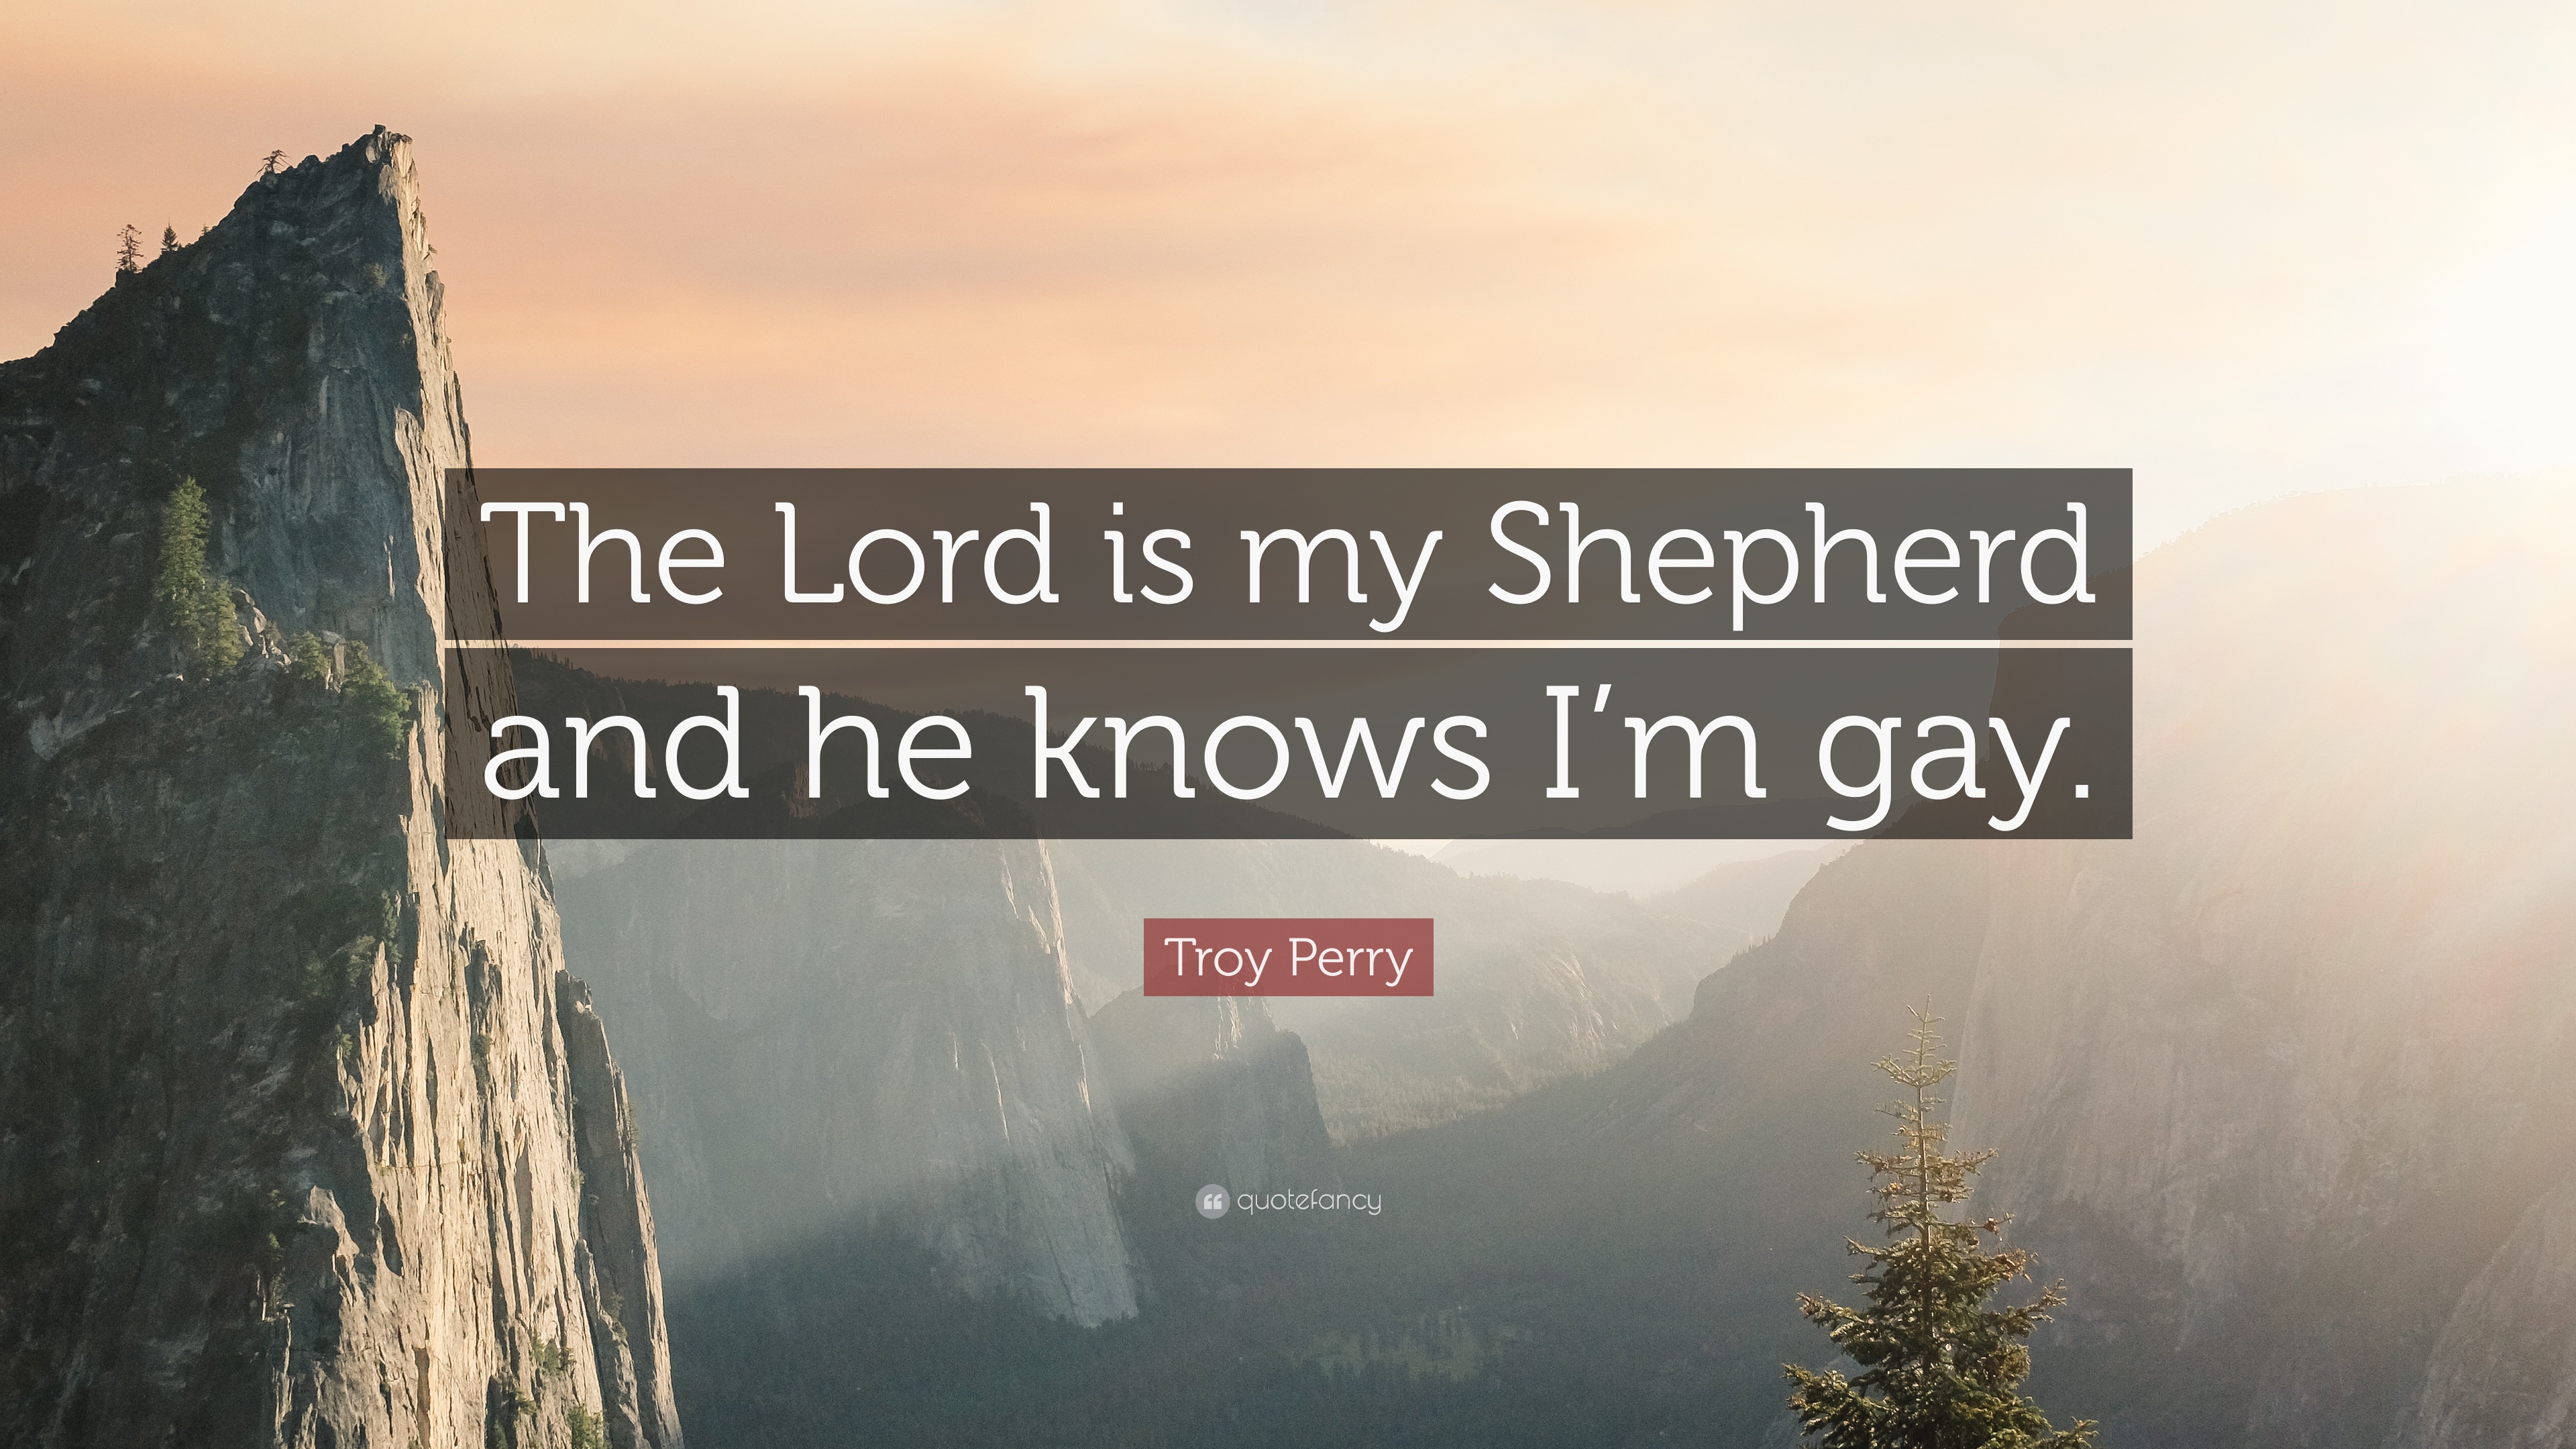 Troy Perry Quote: “The Lord is my Shepherd and he knows I'm gay.”